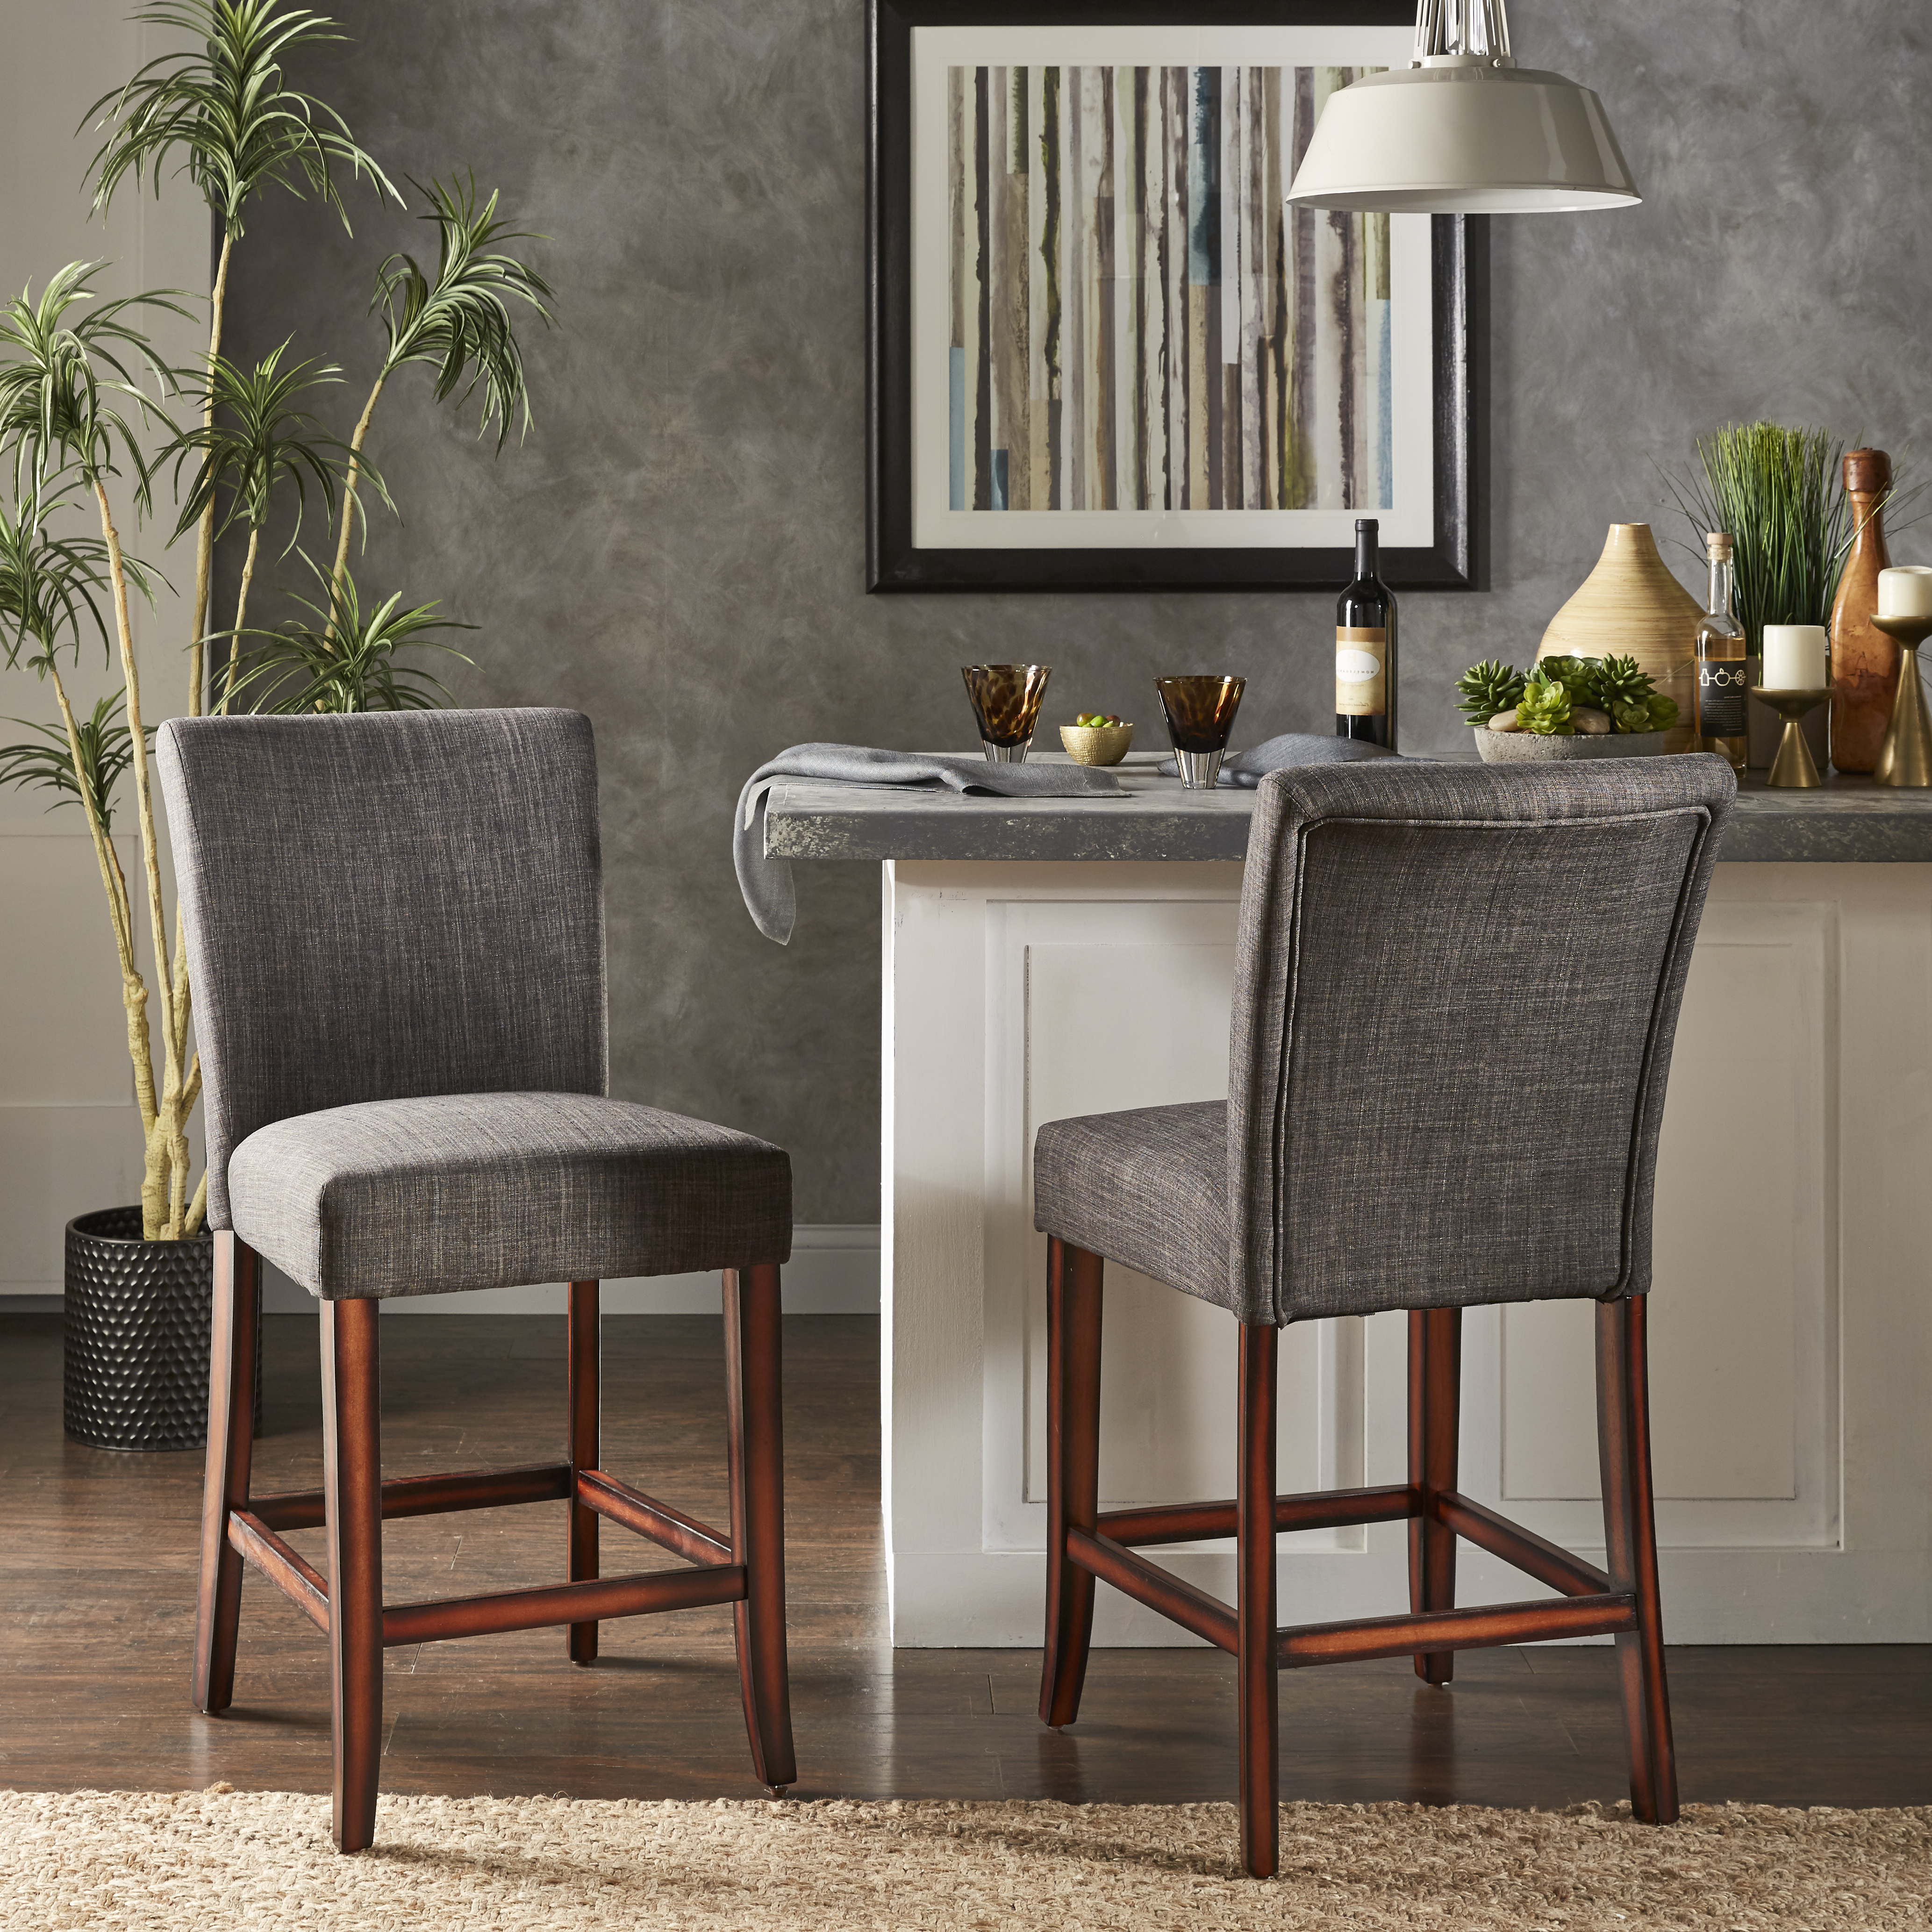 Classic Upholstered High Back Counter Height Chairs (Set of 2)